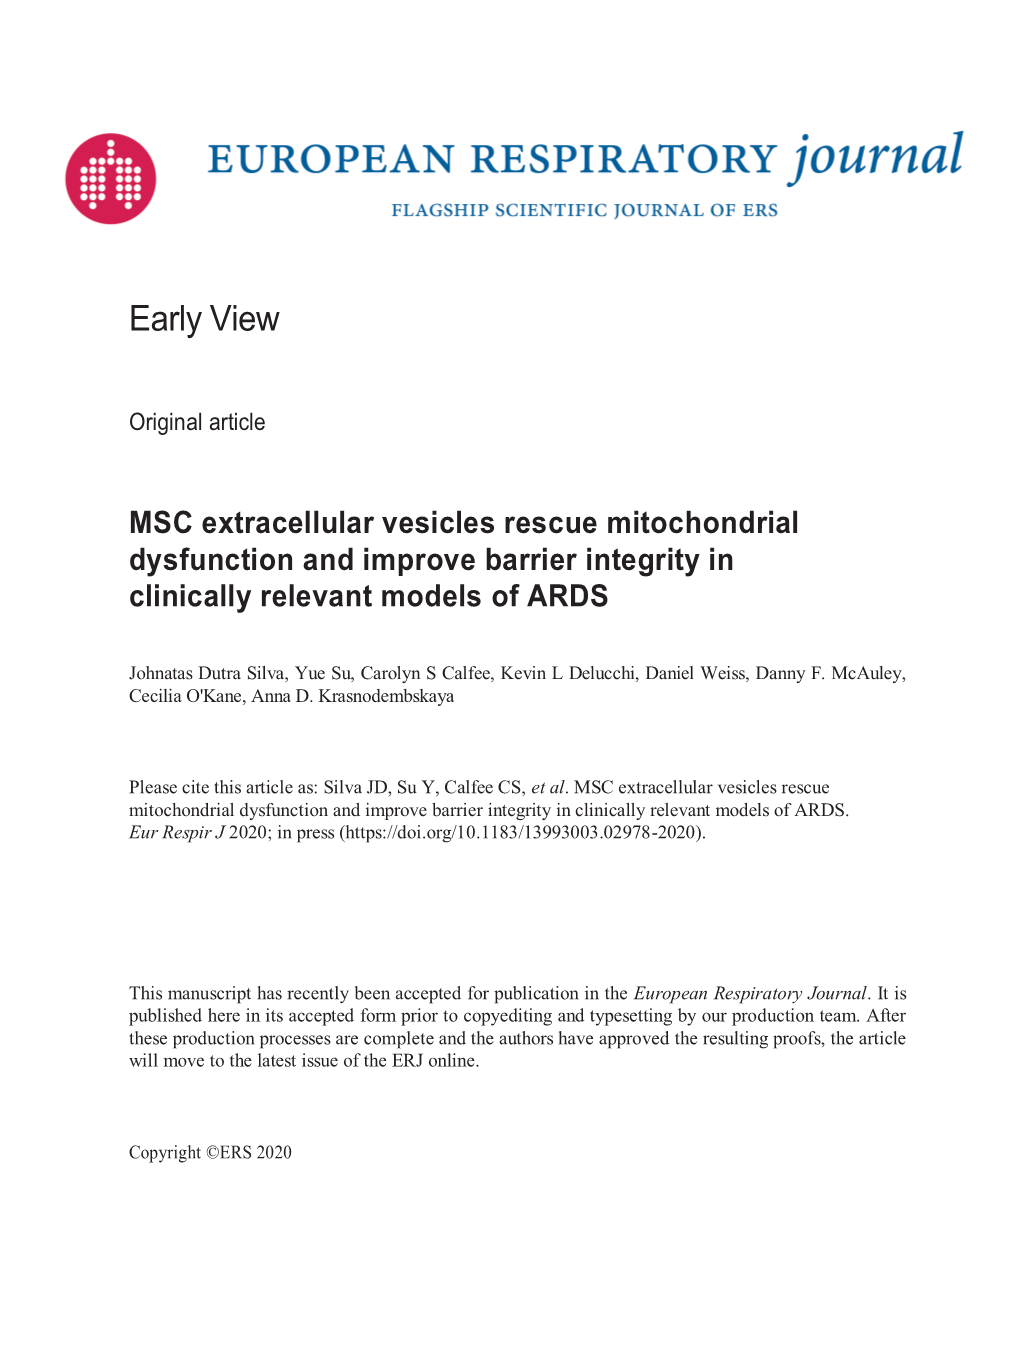 MSC Extracellular Vesicles Rescue Mitochondrial Dysfunction and Improve Barrier Integrity in Clinically Relevant Models of ARDS